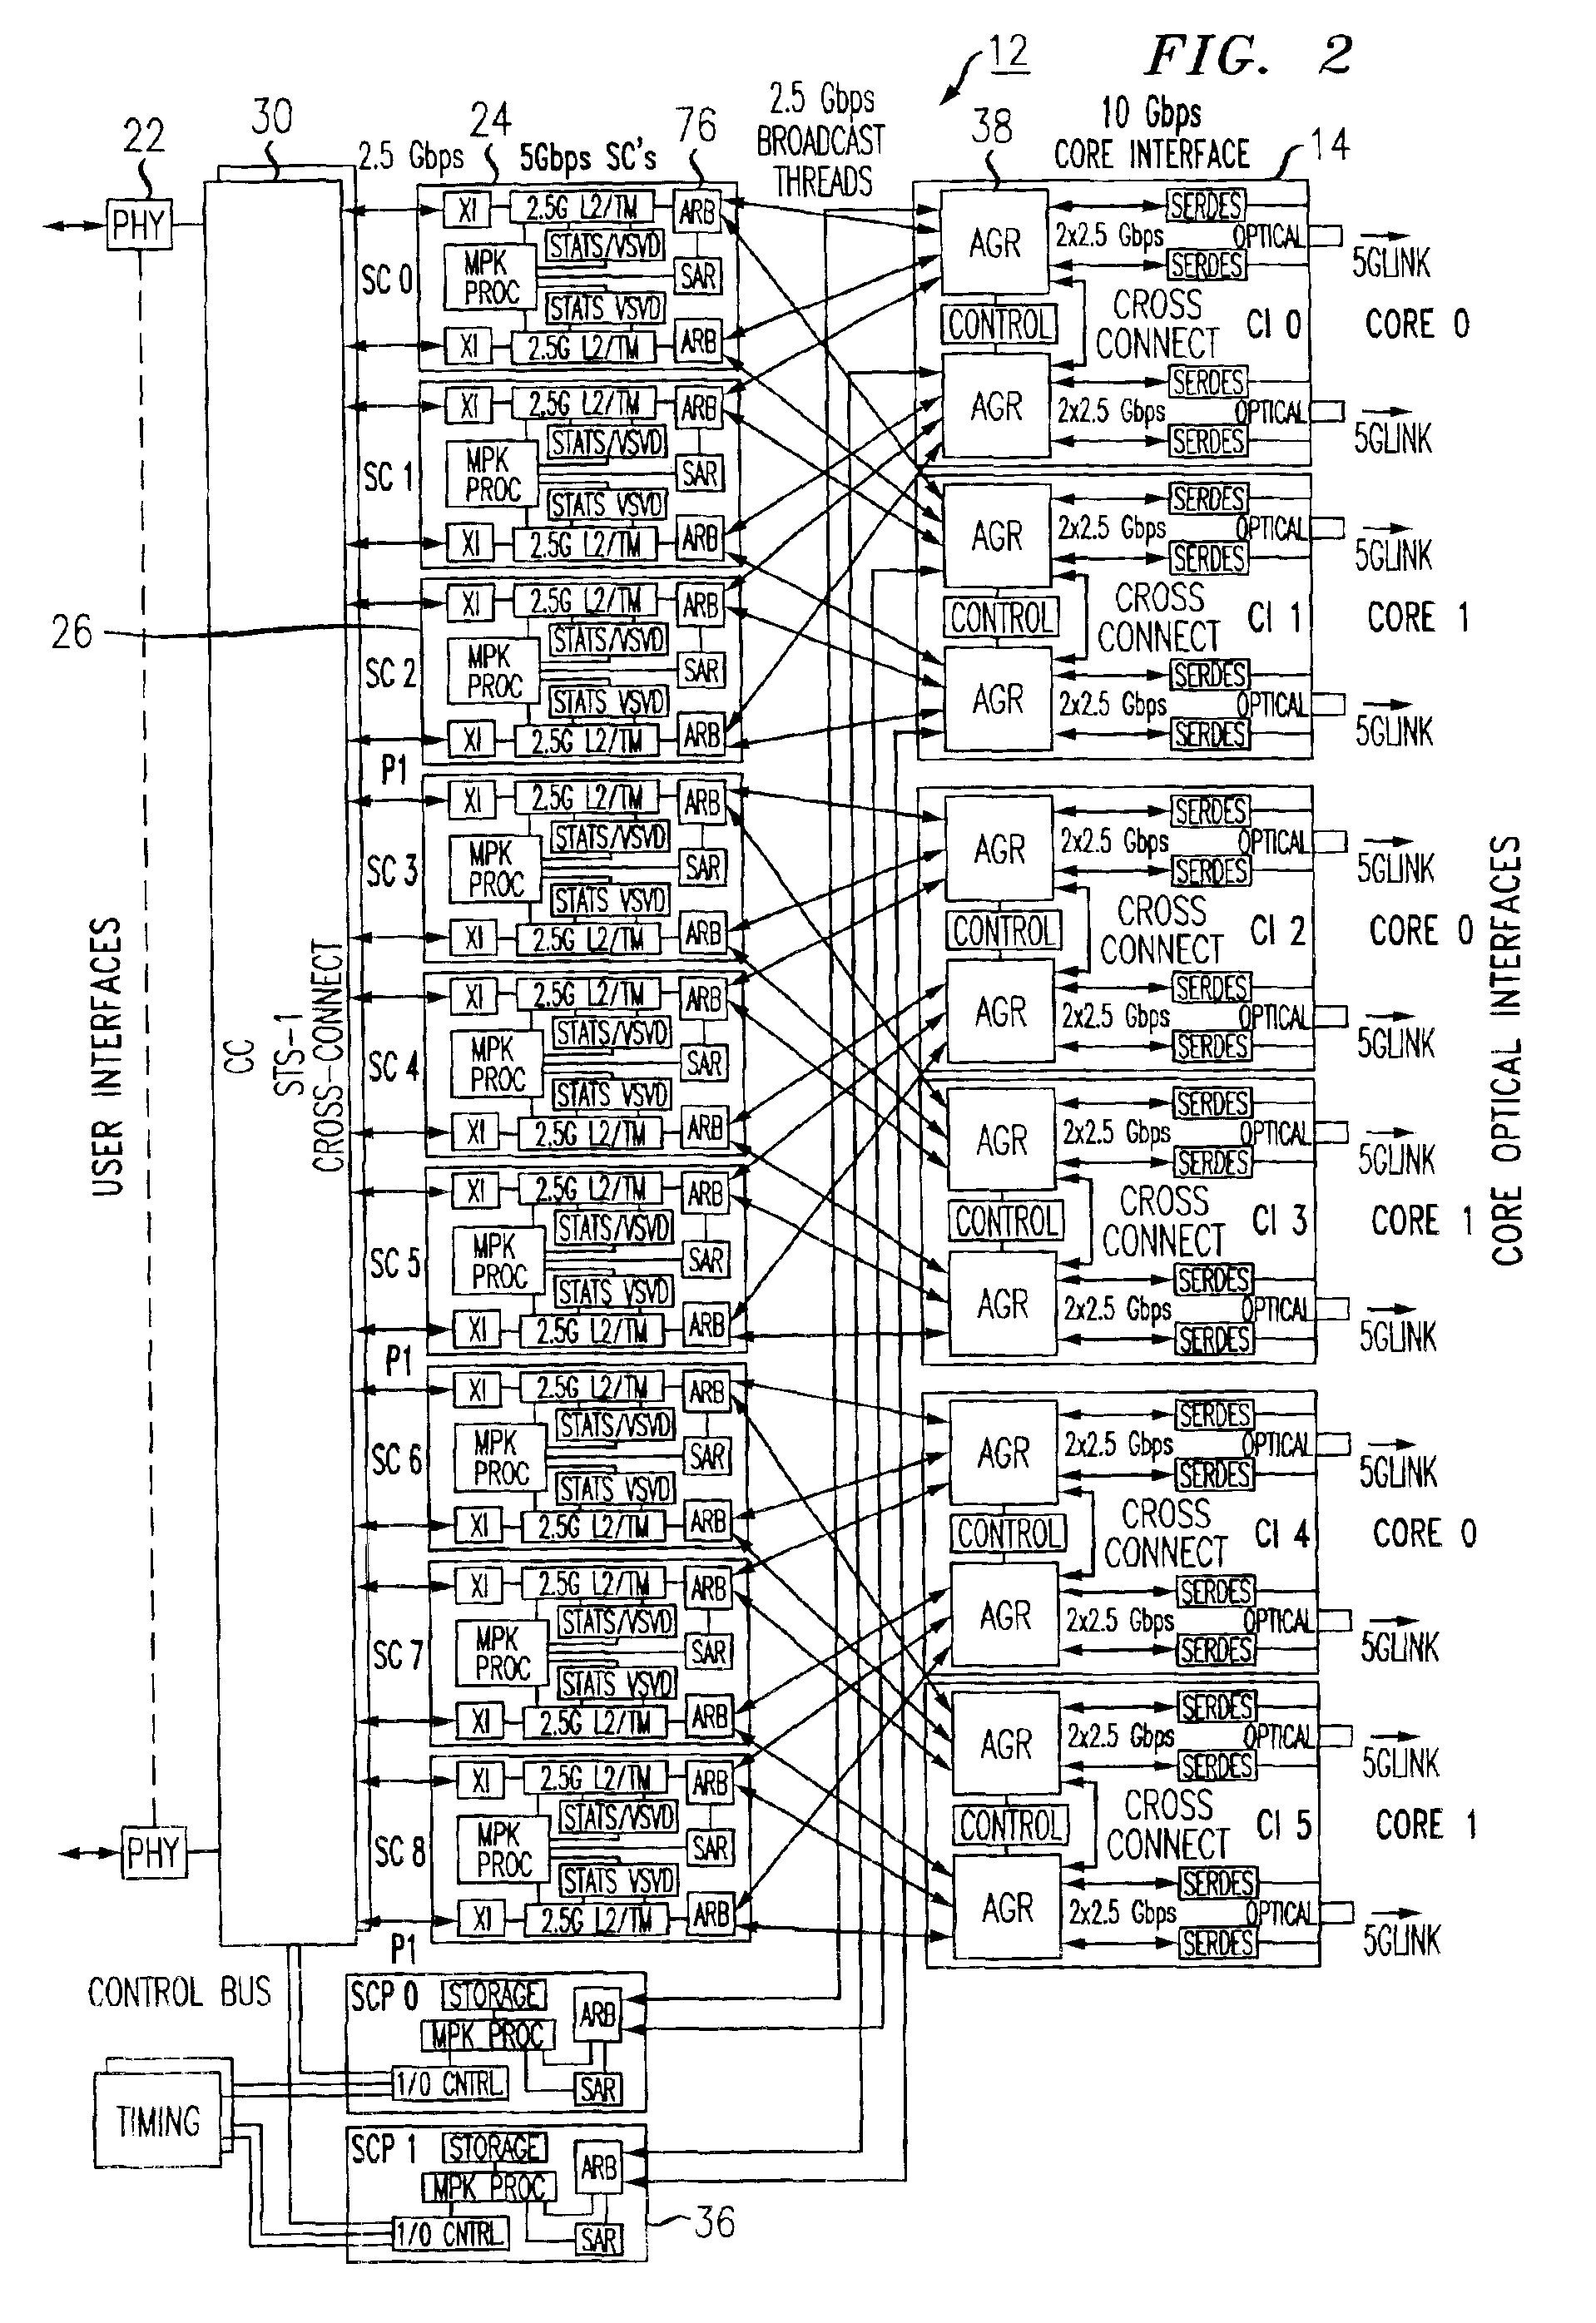 Controlled switchover of unicast and multicast data flows in a packet based switching system